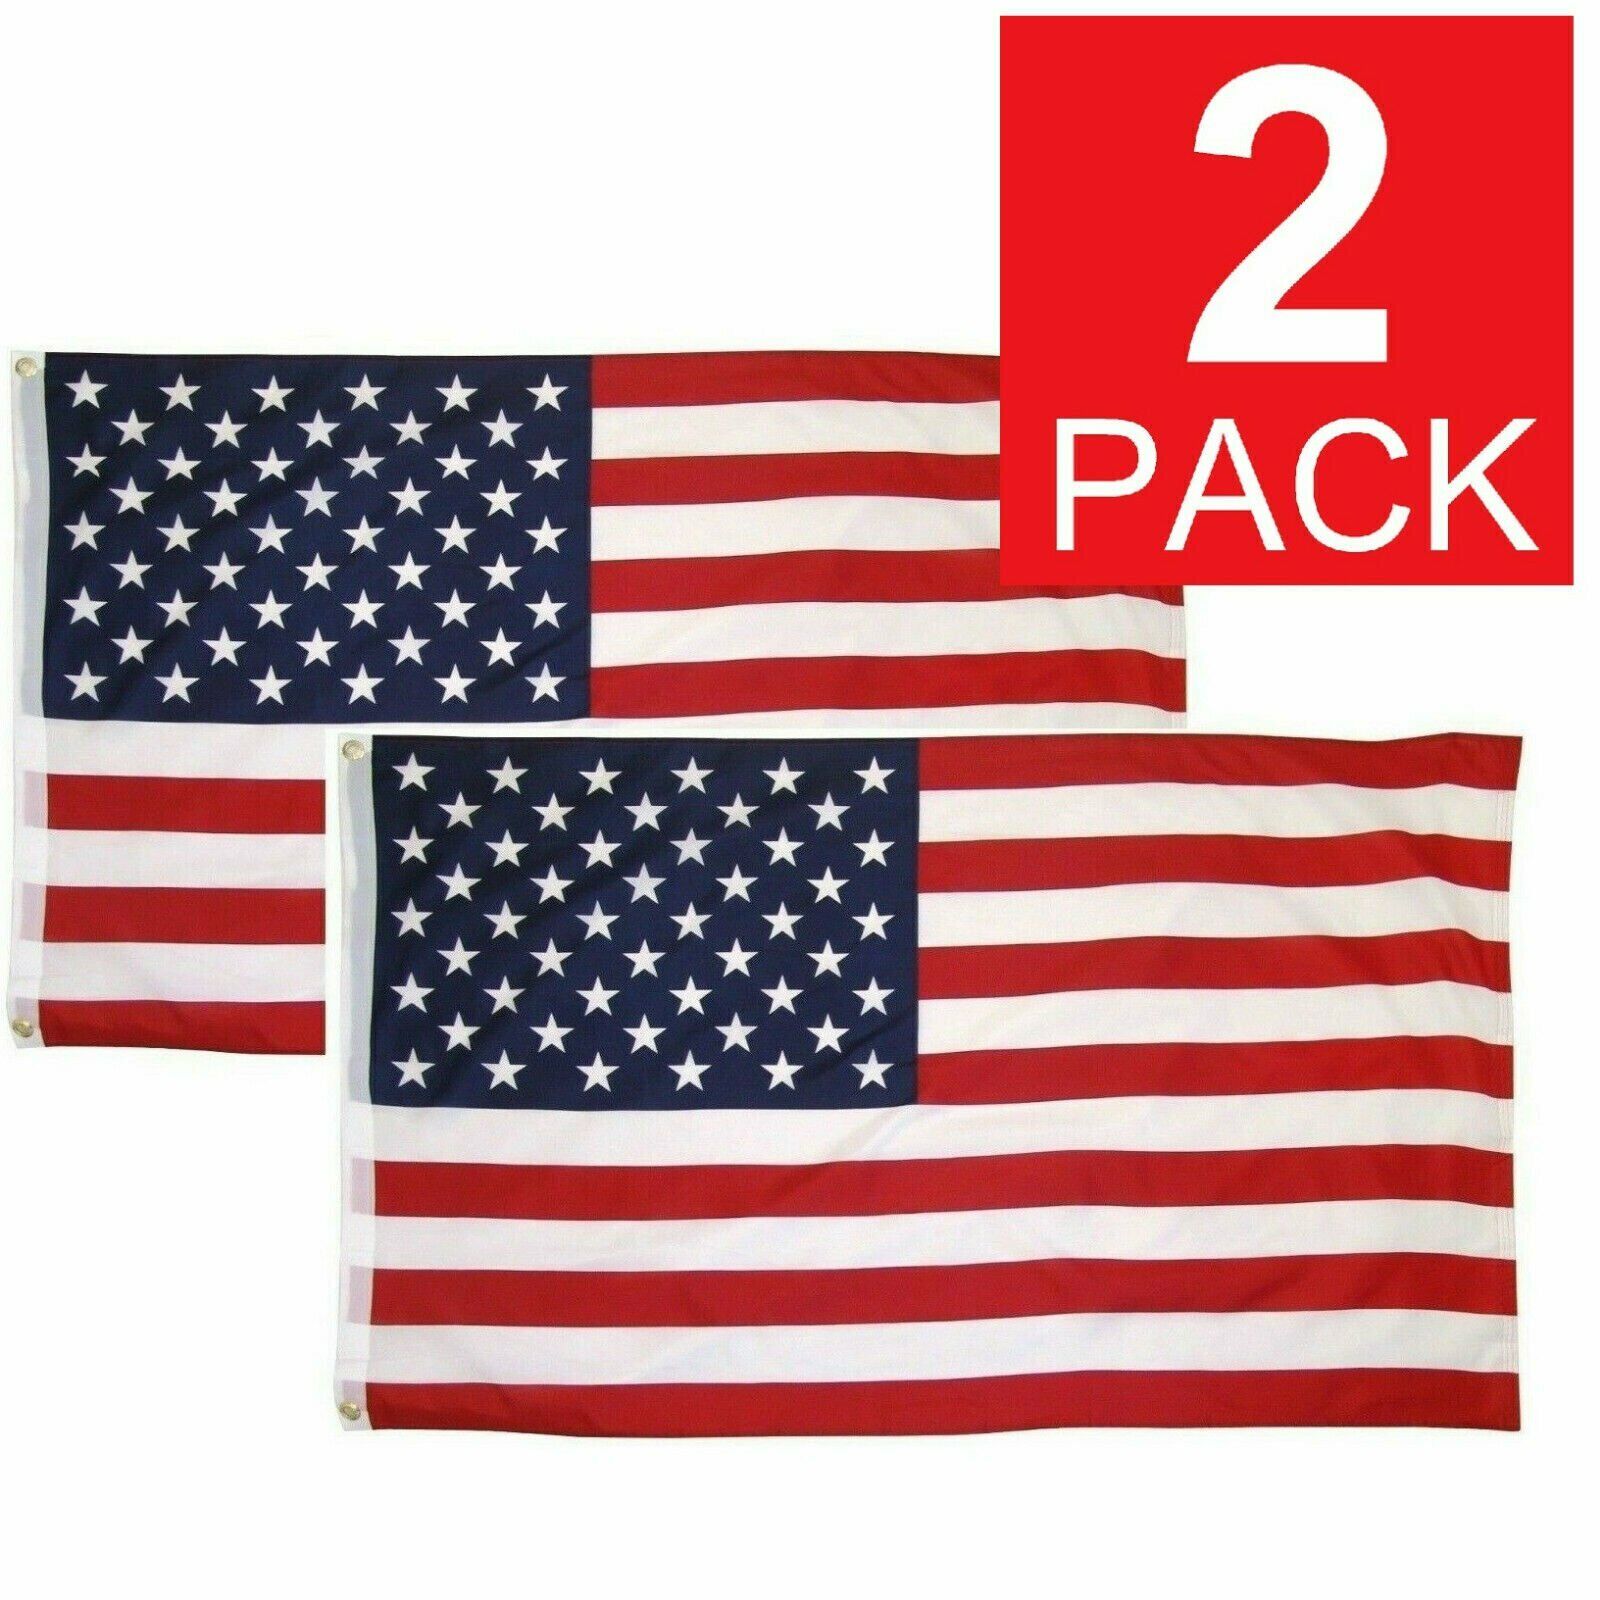 3x5 Ft American Flag w/ Grommets ~2 Pack~ USA United States of America ~US Flags